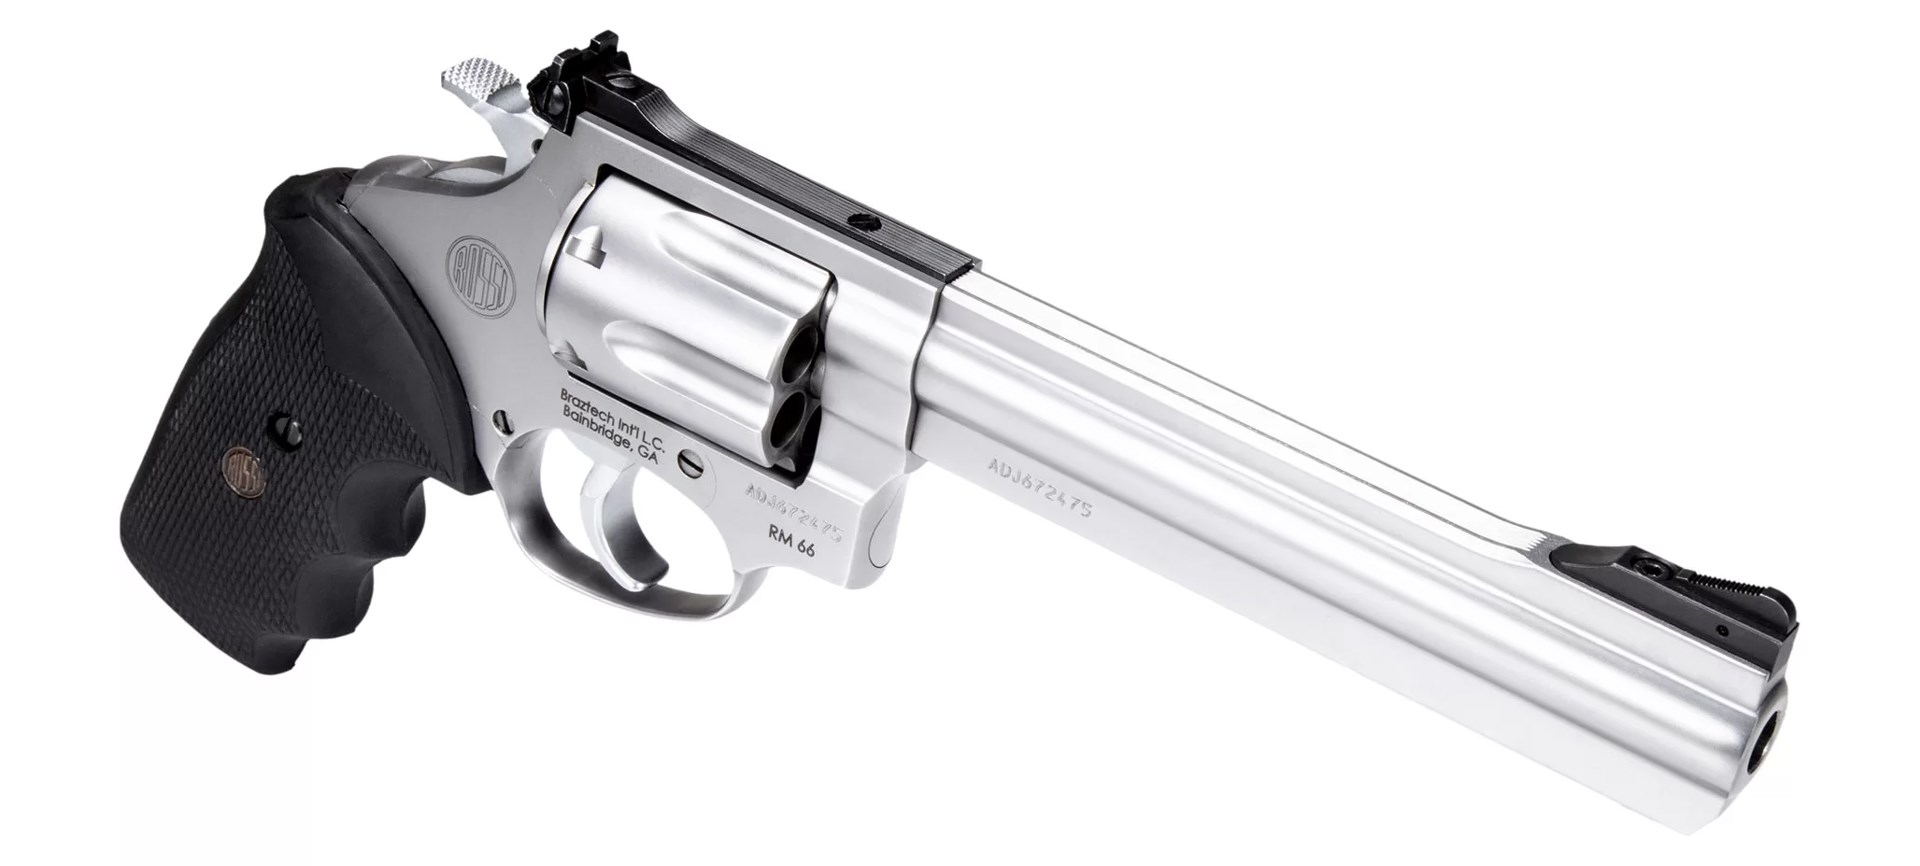 Rossi USA RM66 quarting view stainless steel revolver on white